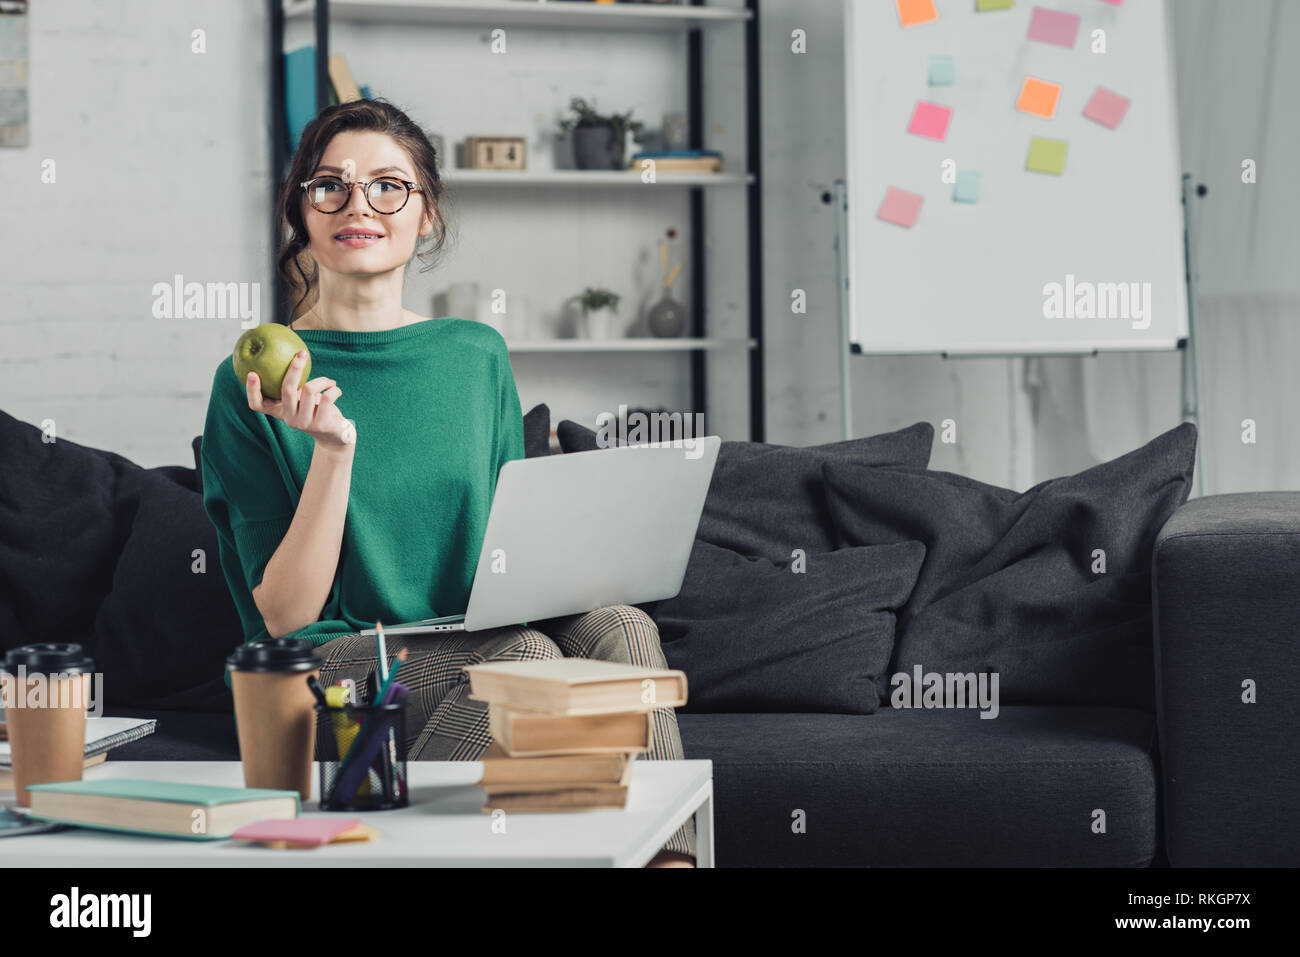 attractive woman holding apple and sitting on sofa with laptop Stock Photo